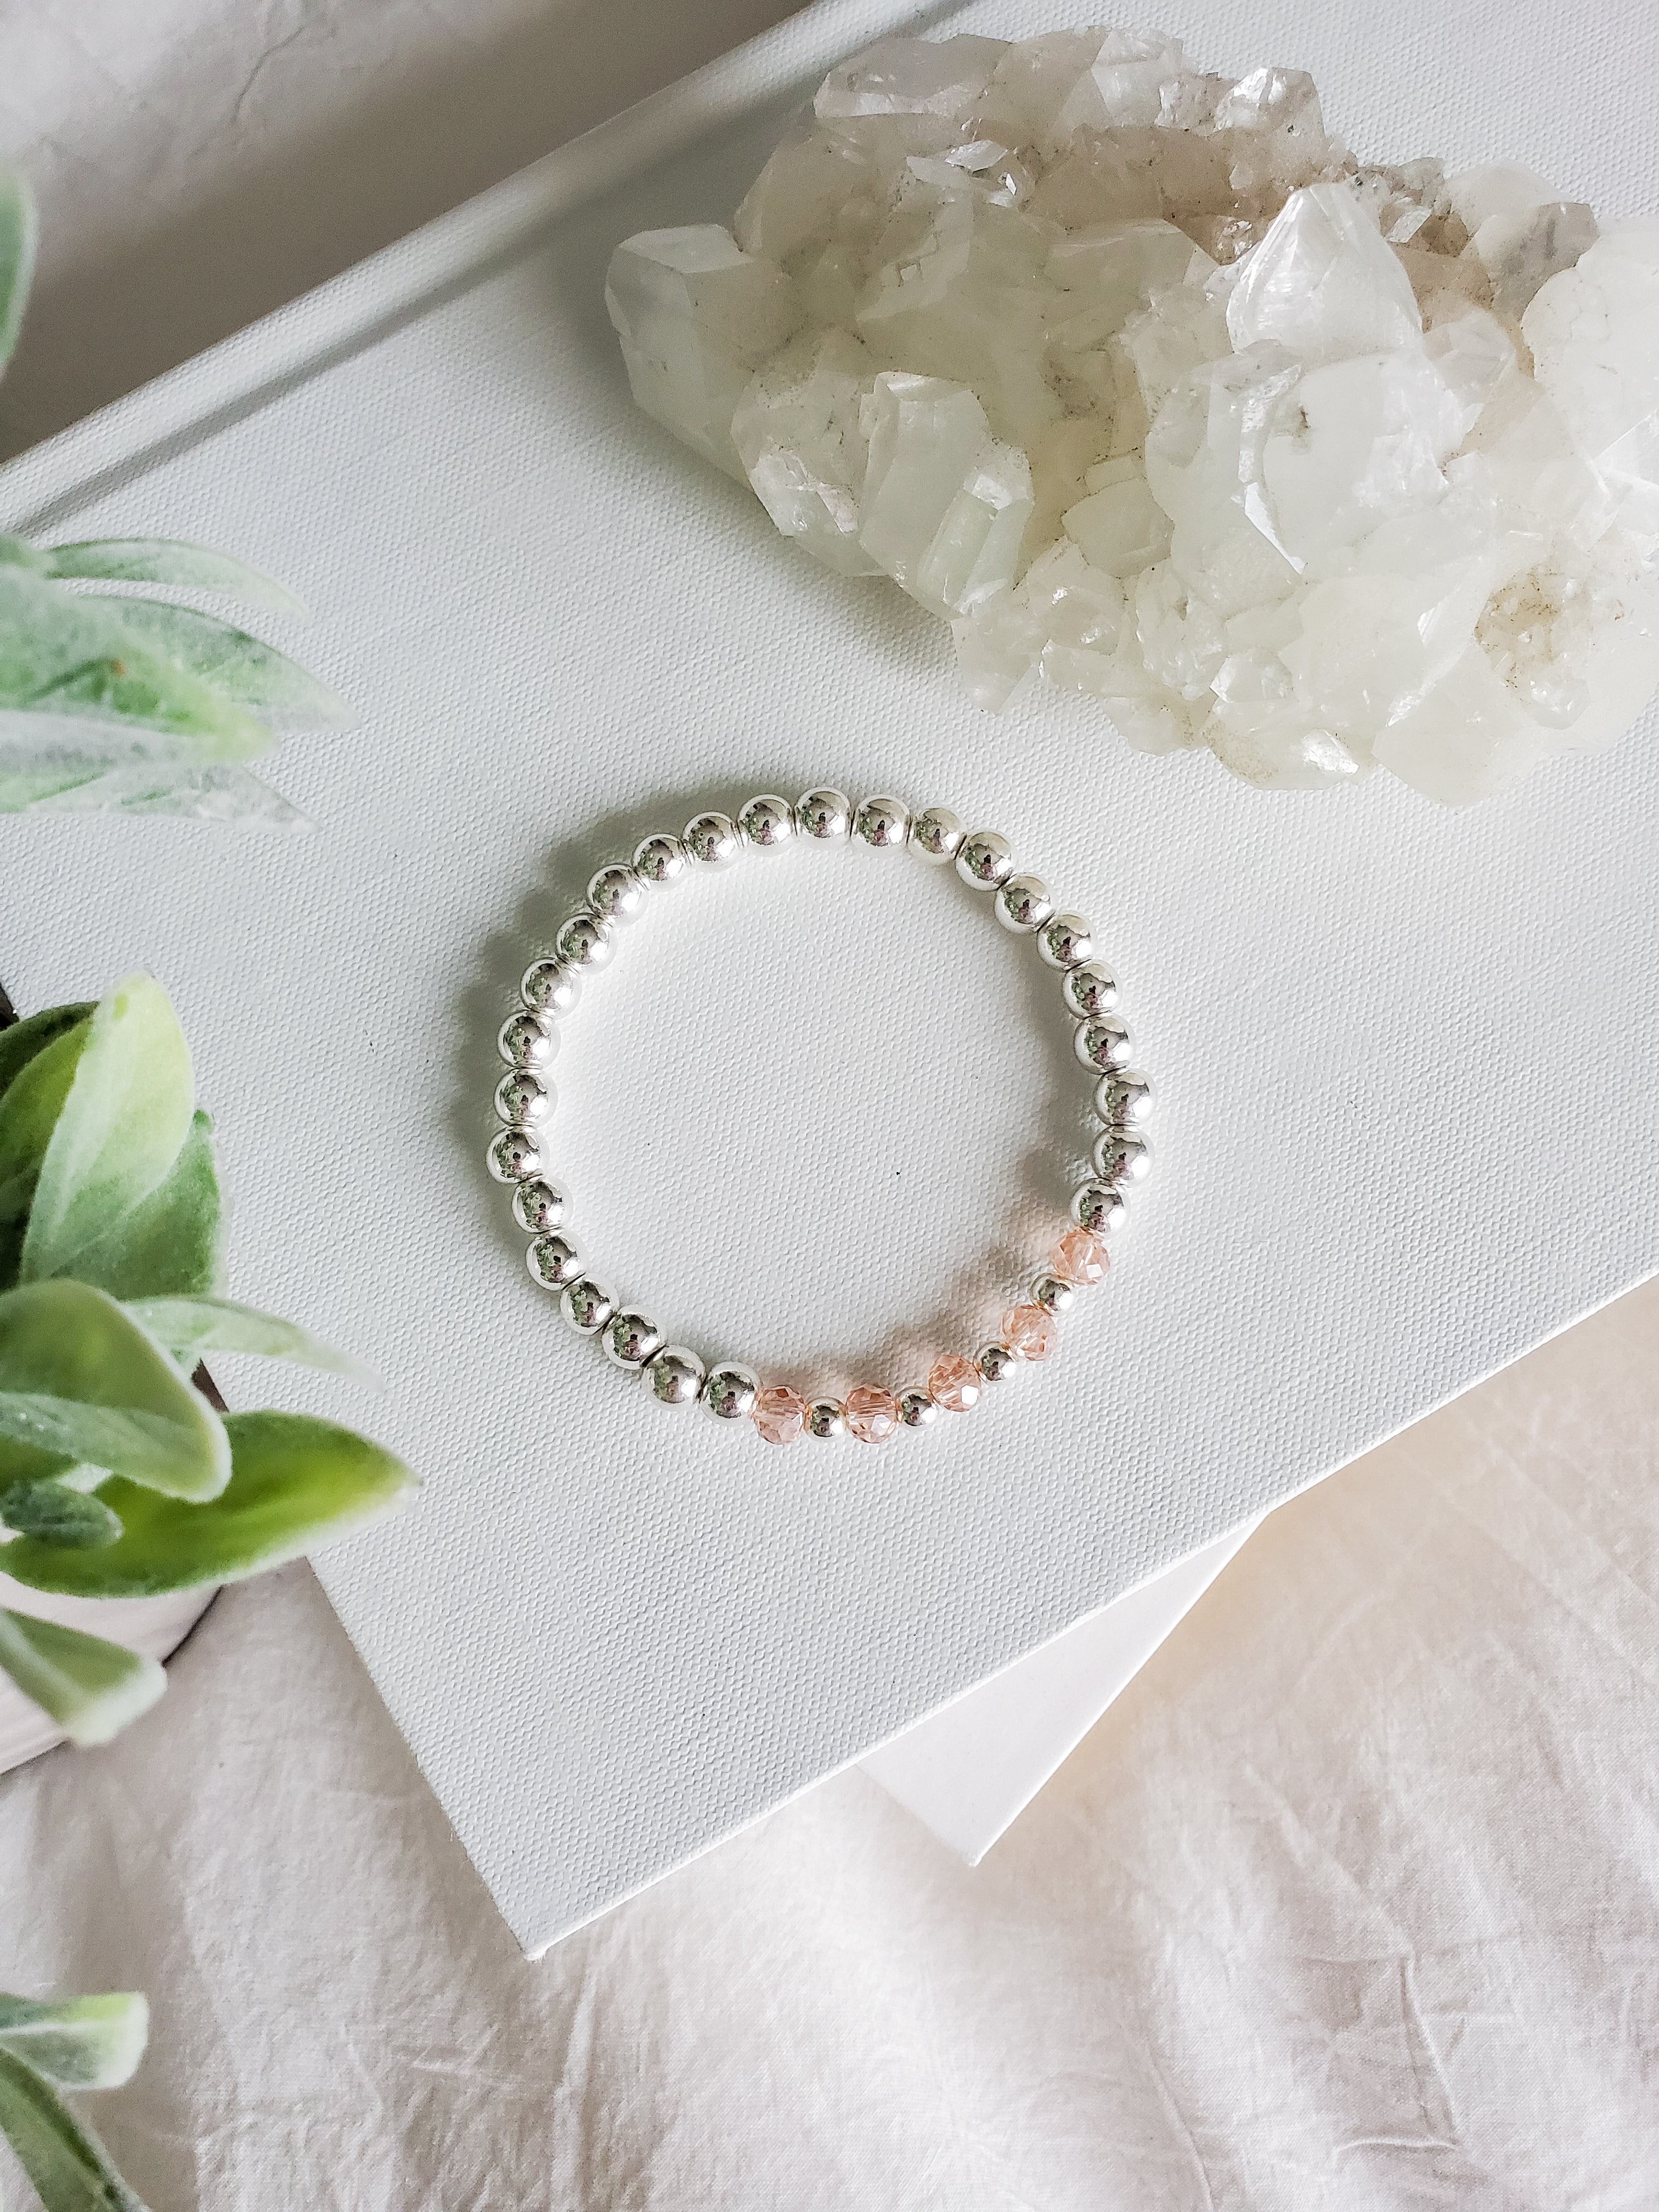 Dainty silver and pink beaded bracelet